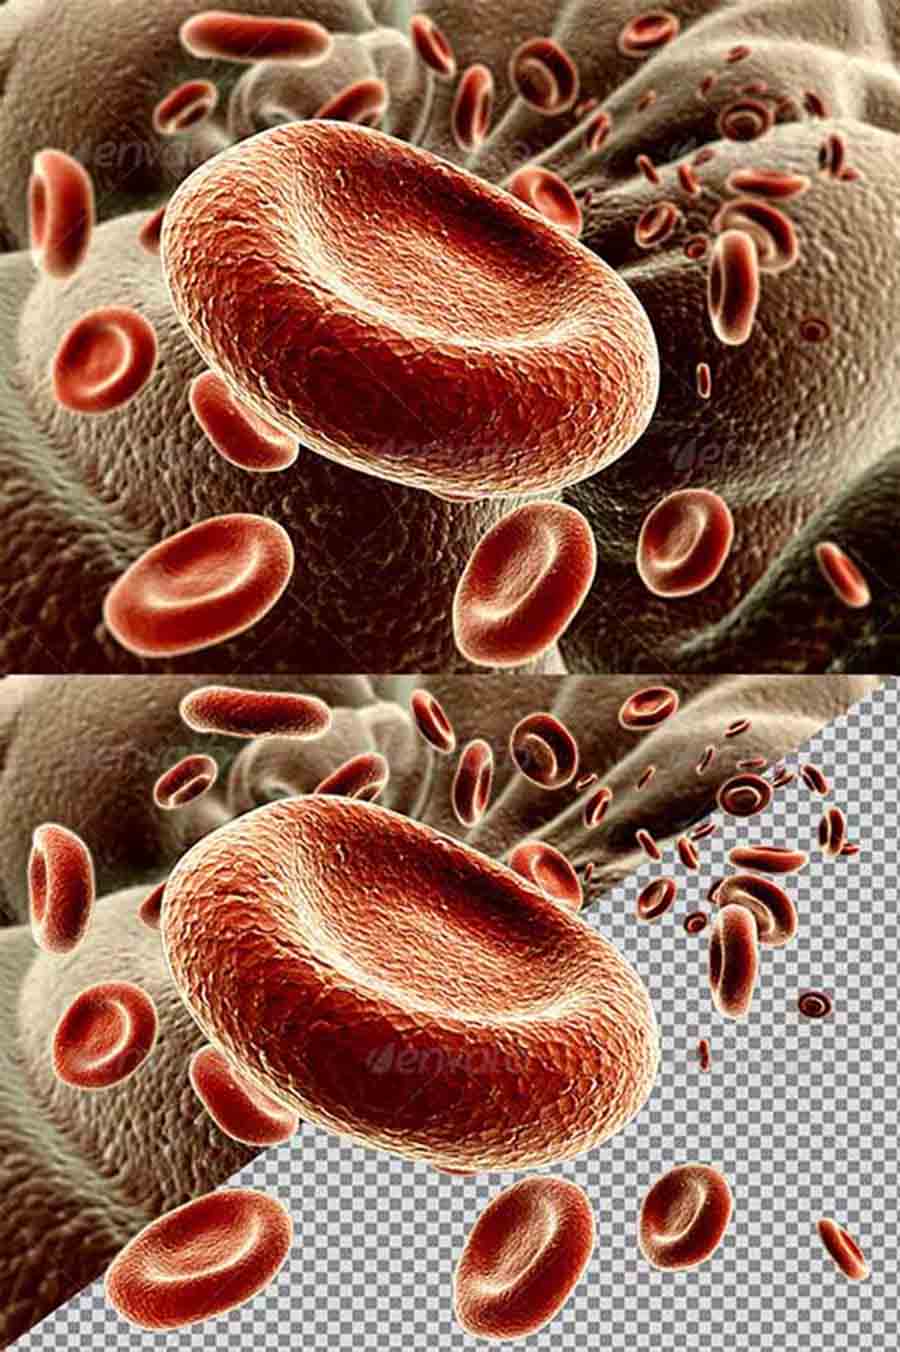 red-blood-cells-copy